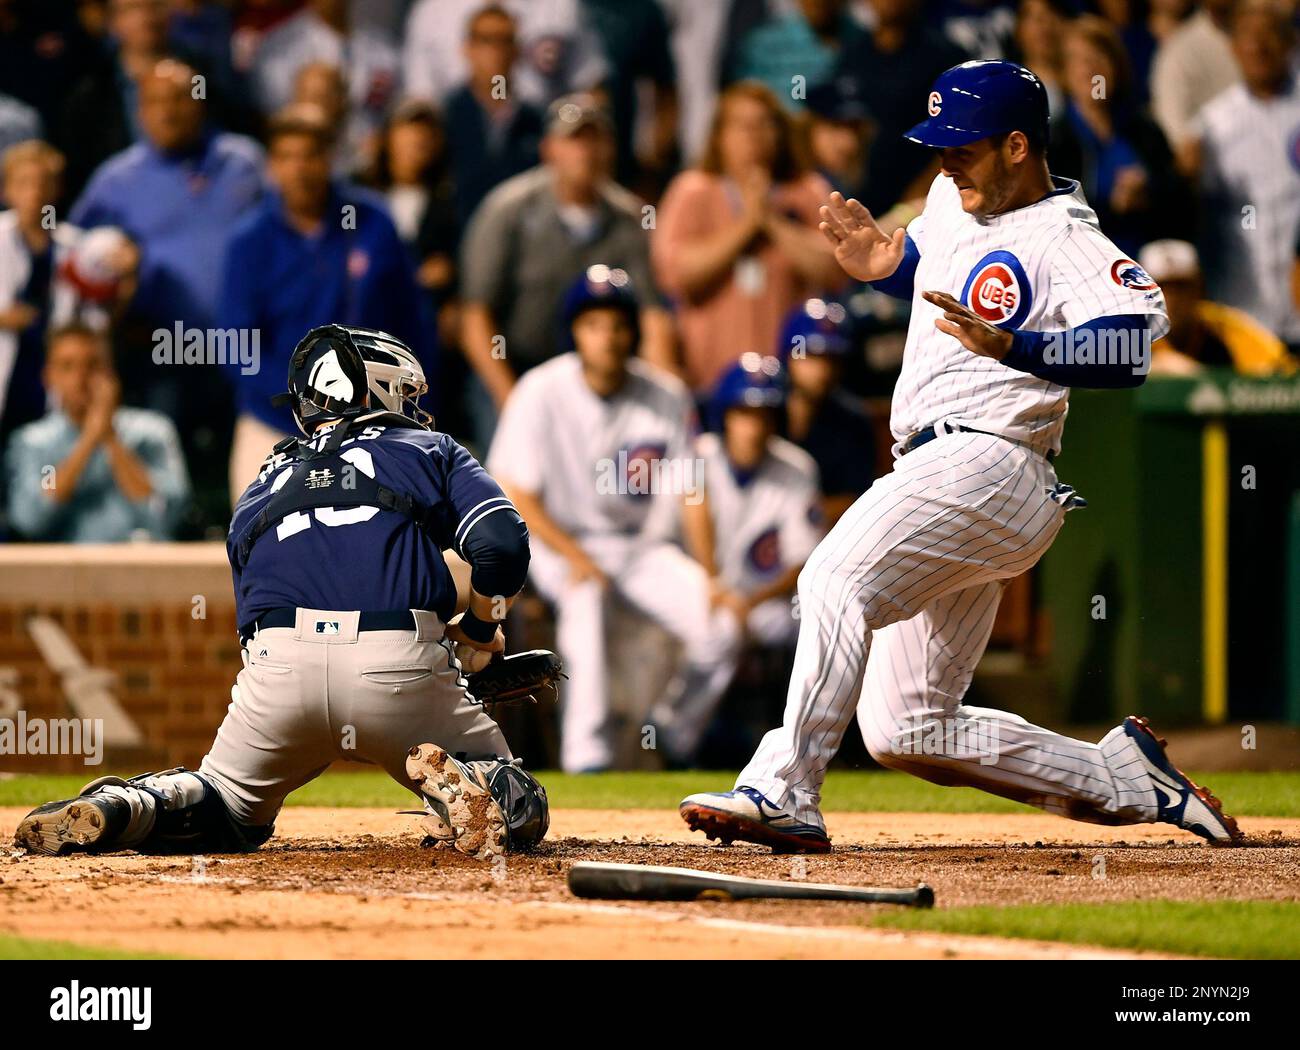 Mar 31, 2019: Chicago Cubs first baseman Anthony Rizzo #44 at first base  during an MLB game between the Chicago Cubs and the Texas Rangers at Globe  Life Park in Arlington, TX